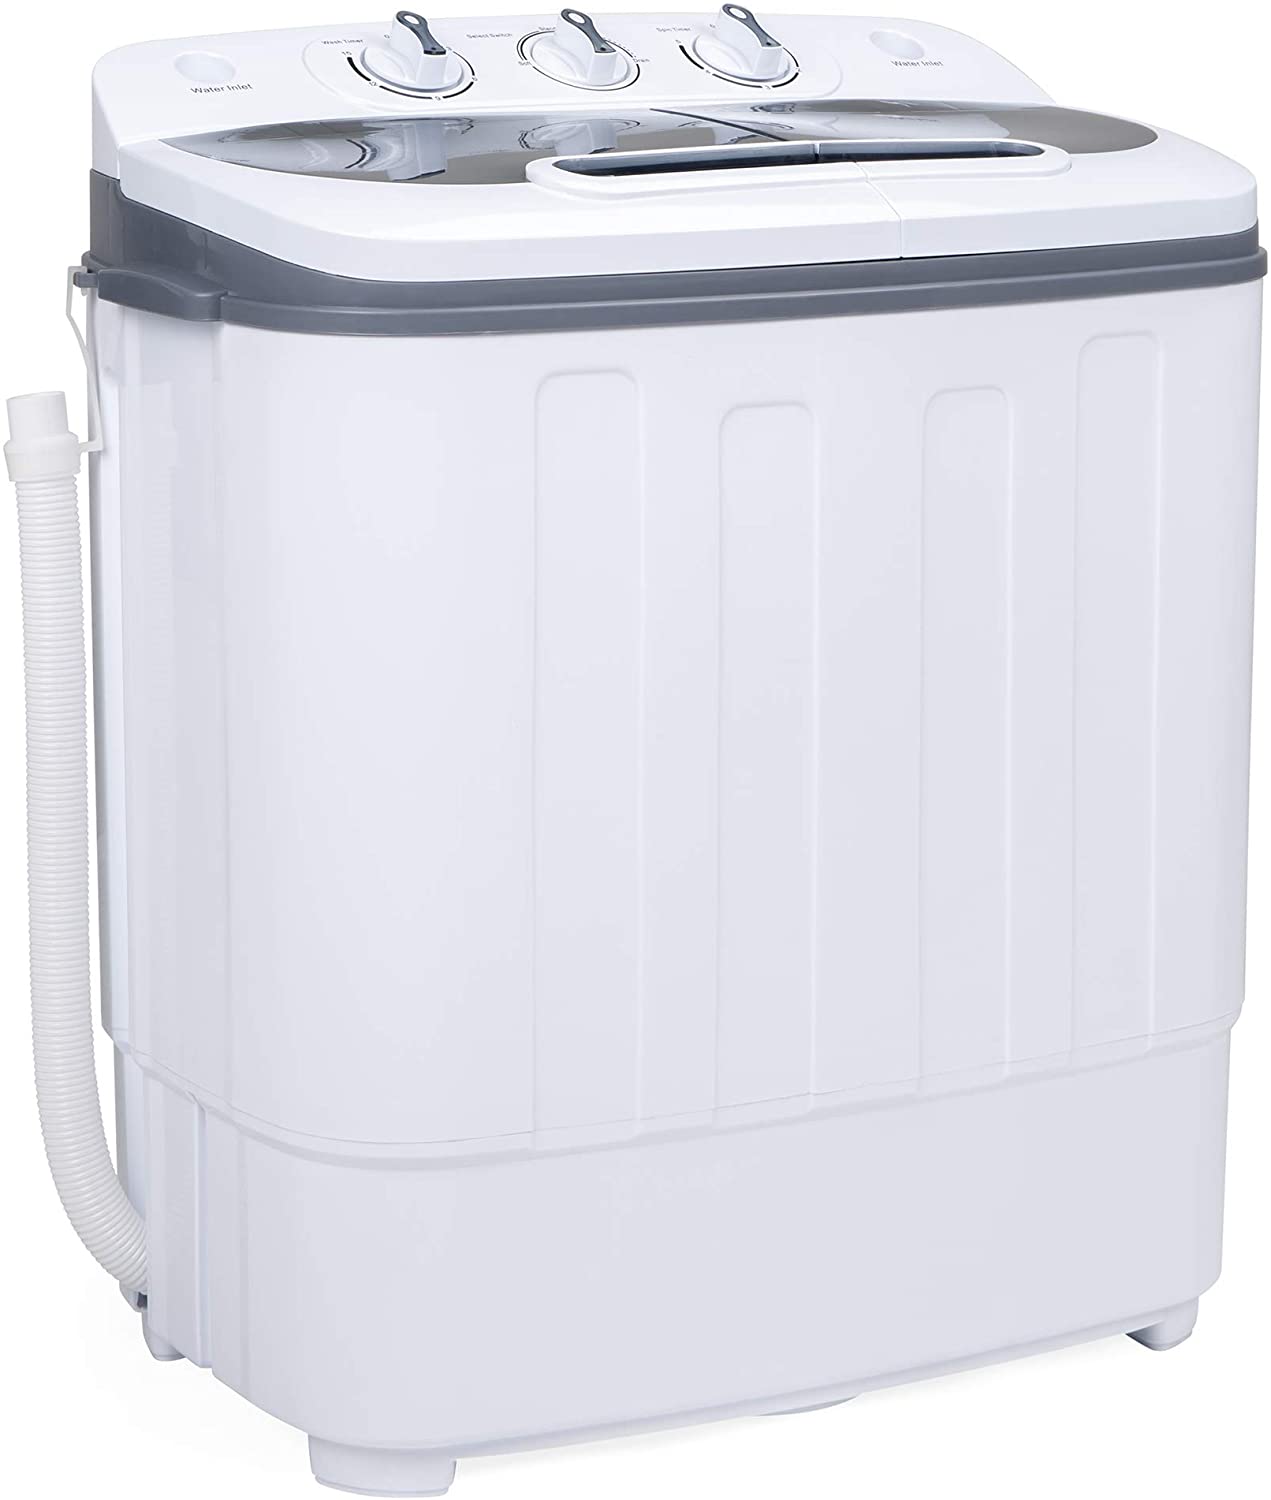 Best Choice Products Portable Compact Twin Tub Laundry Machine & Spin Cycle w/Hose, 13lbs Capacity - White/Gray